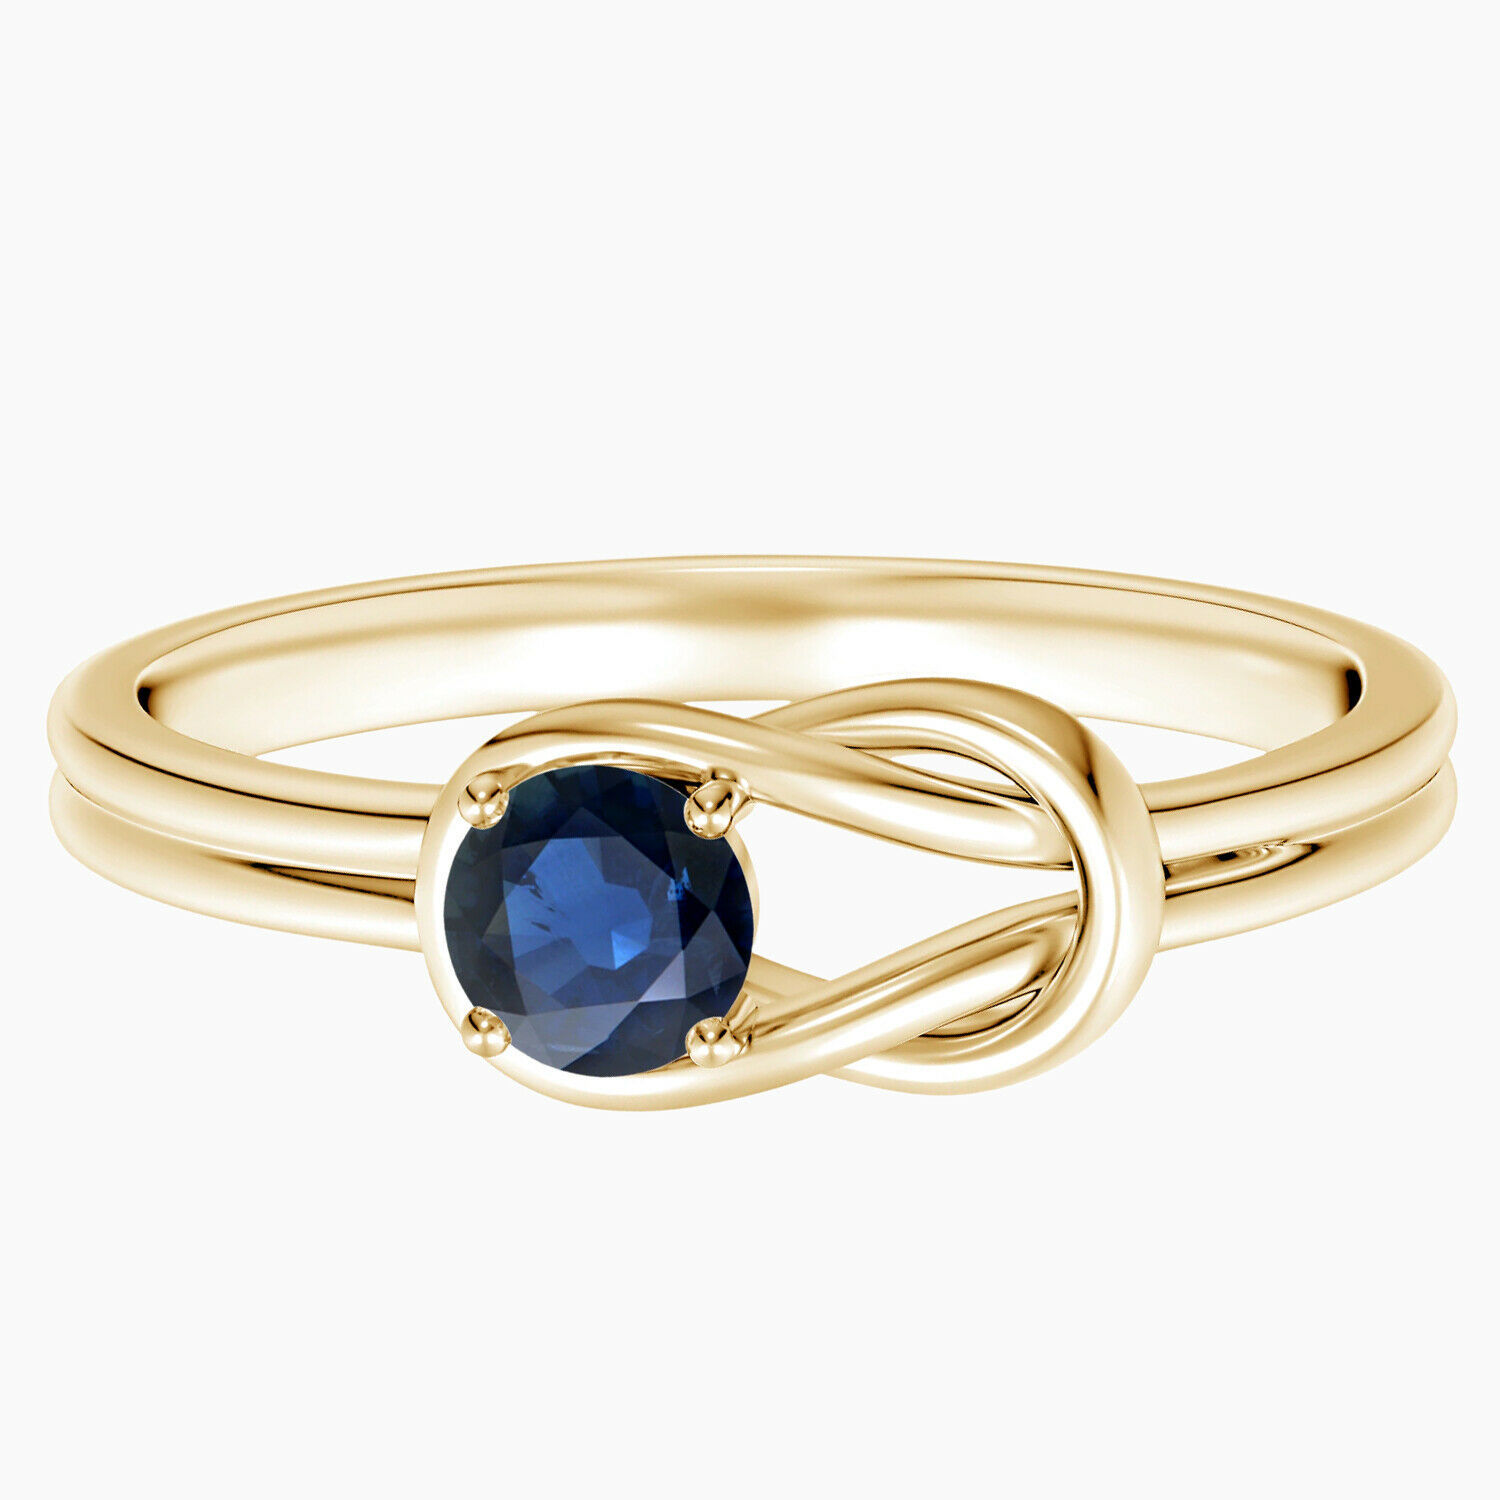 Infinity Knot Ring!! 0.50 Cts Blue Sapphire Solitaire Ring in 9k Yellow Gold